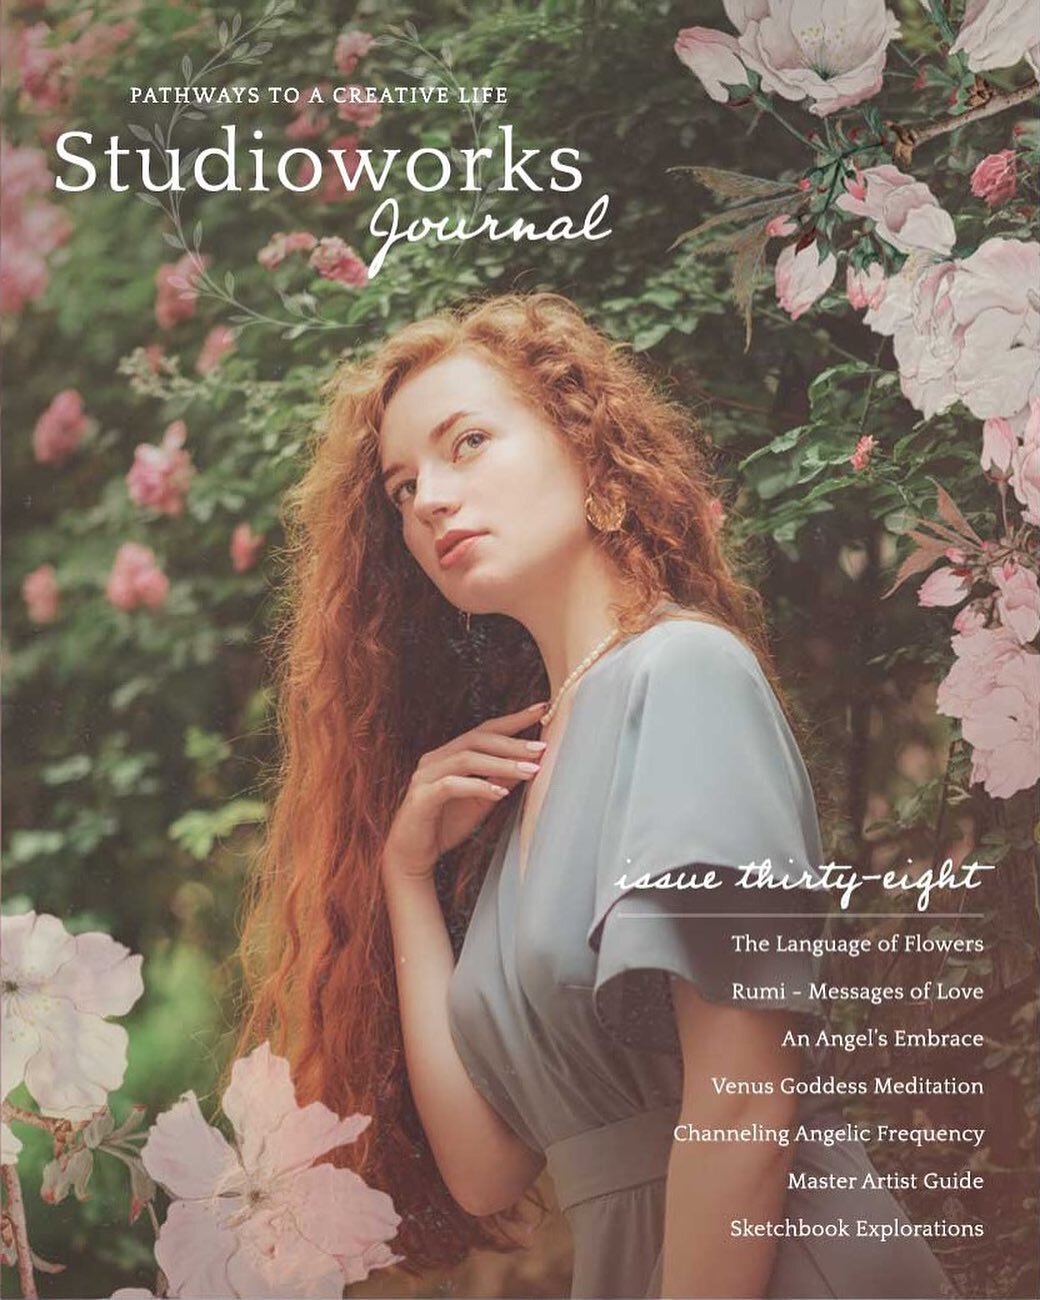 ✨Now Available✨
.
Always excited to share the latest Studioworks Journal! This is Issue #38 and this month we are exploring the Victorian language of flowers and floral symbolism within art, messages of love from Sufi poet, Rumi, getting in touch wit